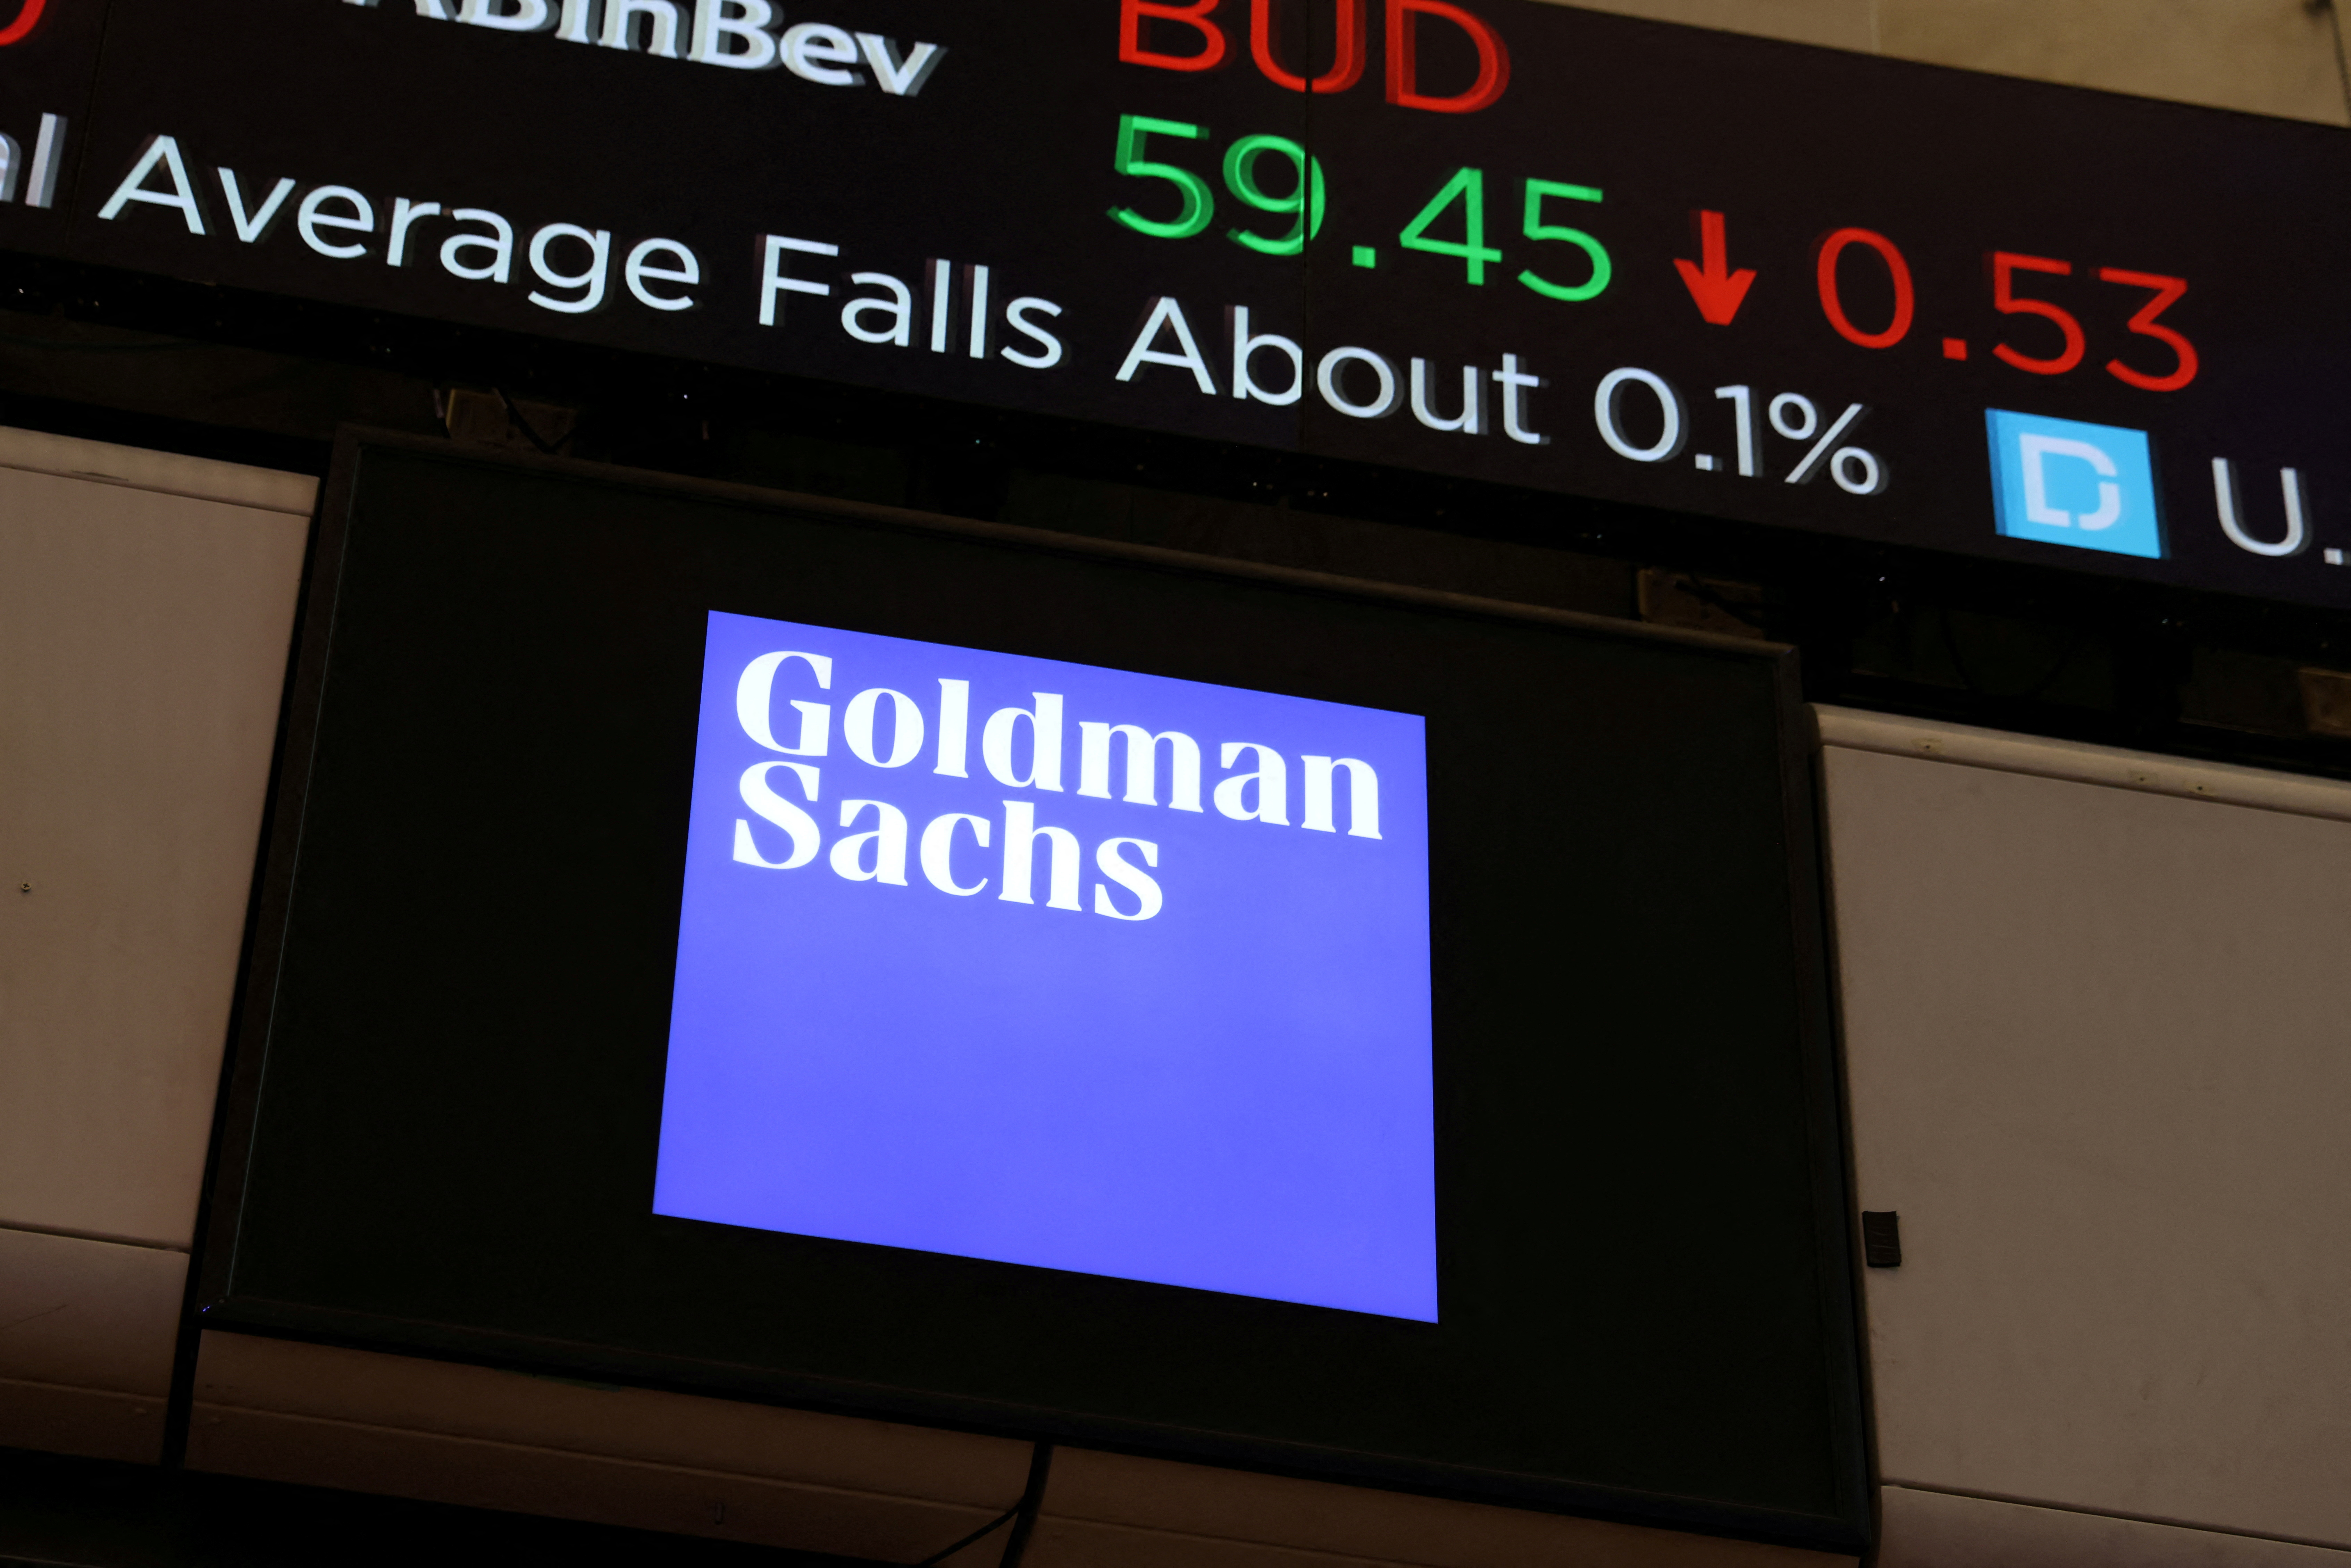 The logo for Goldman Sachs is seen on the trading floor of the New York Stock Exchange (NYSE) in New York City